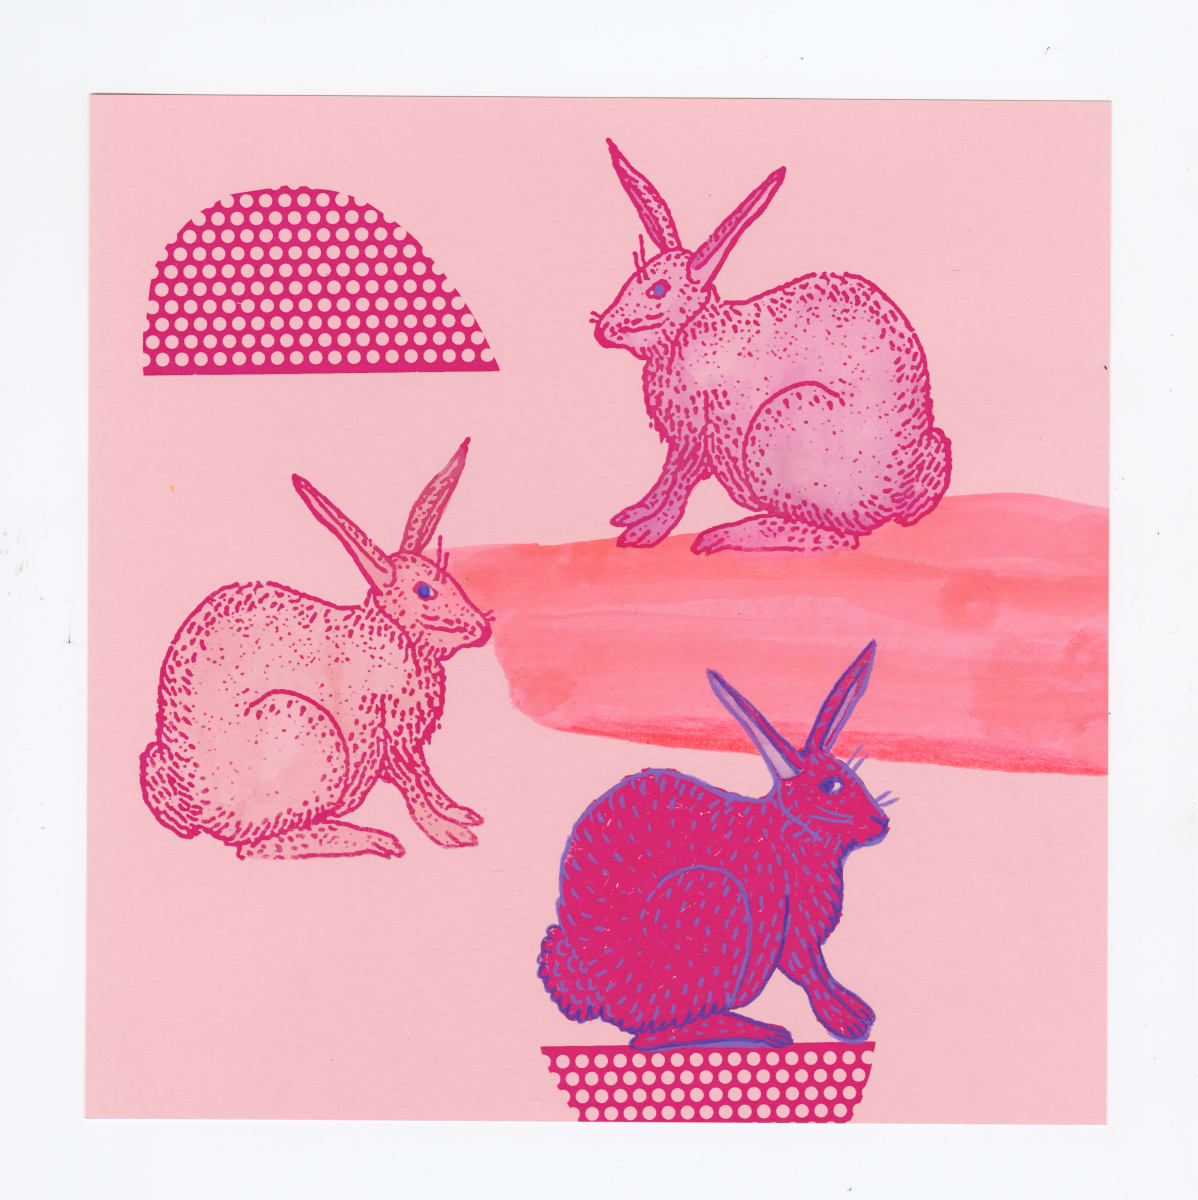 3 Pink Bunnies or Rabbits by Brooke Ann Inman 